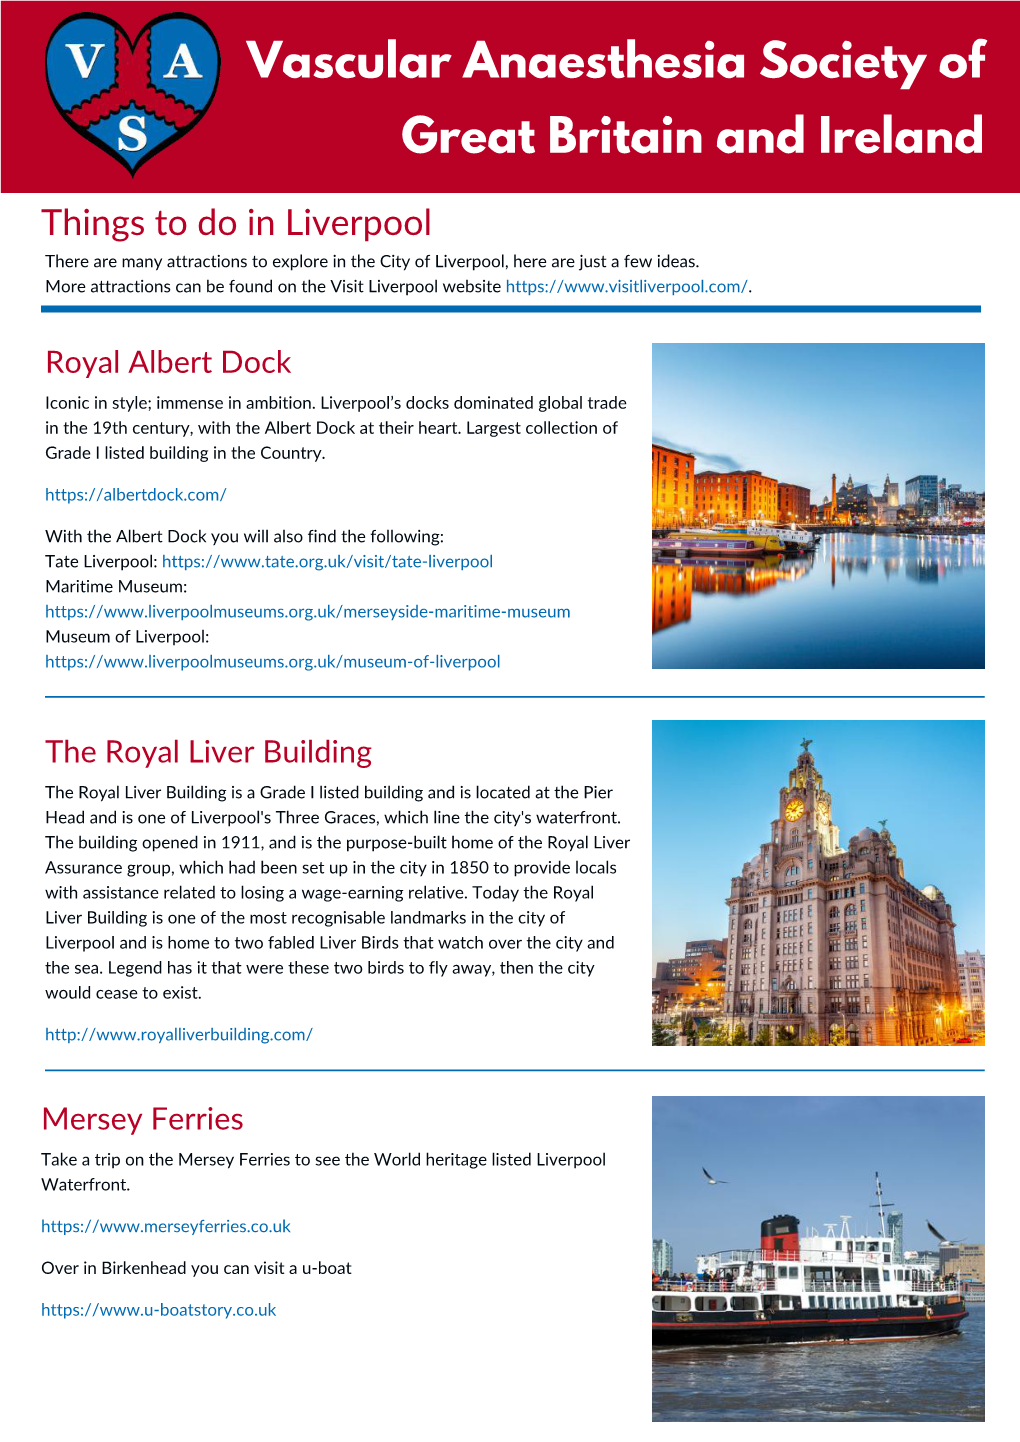 Things to Do in Liverpool There Are Many Attractions to Explore in the City of Liverpool, Here Are Just a Few Ideas